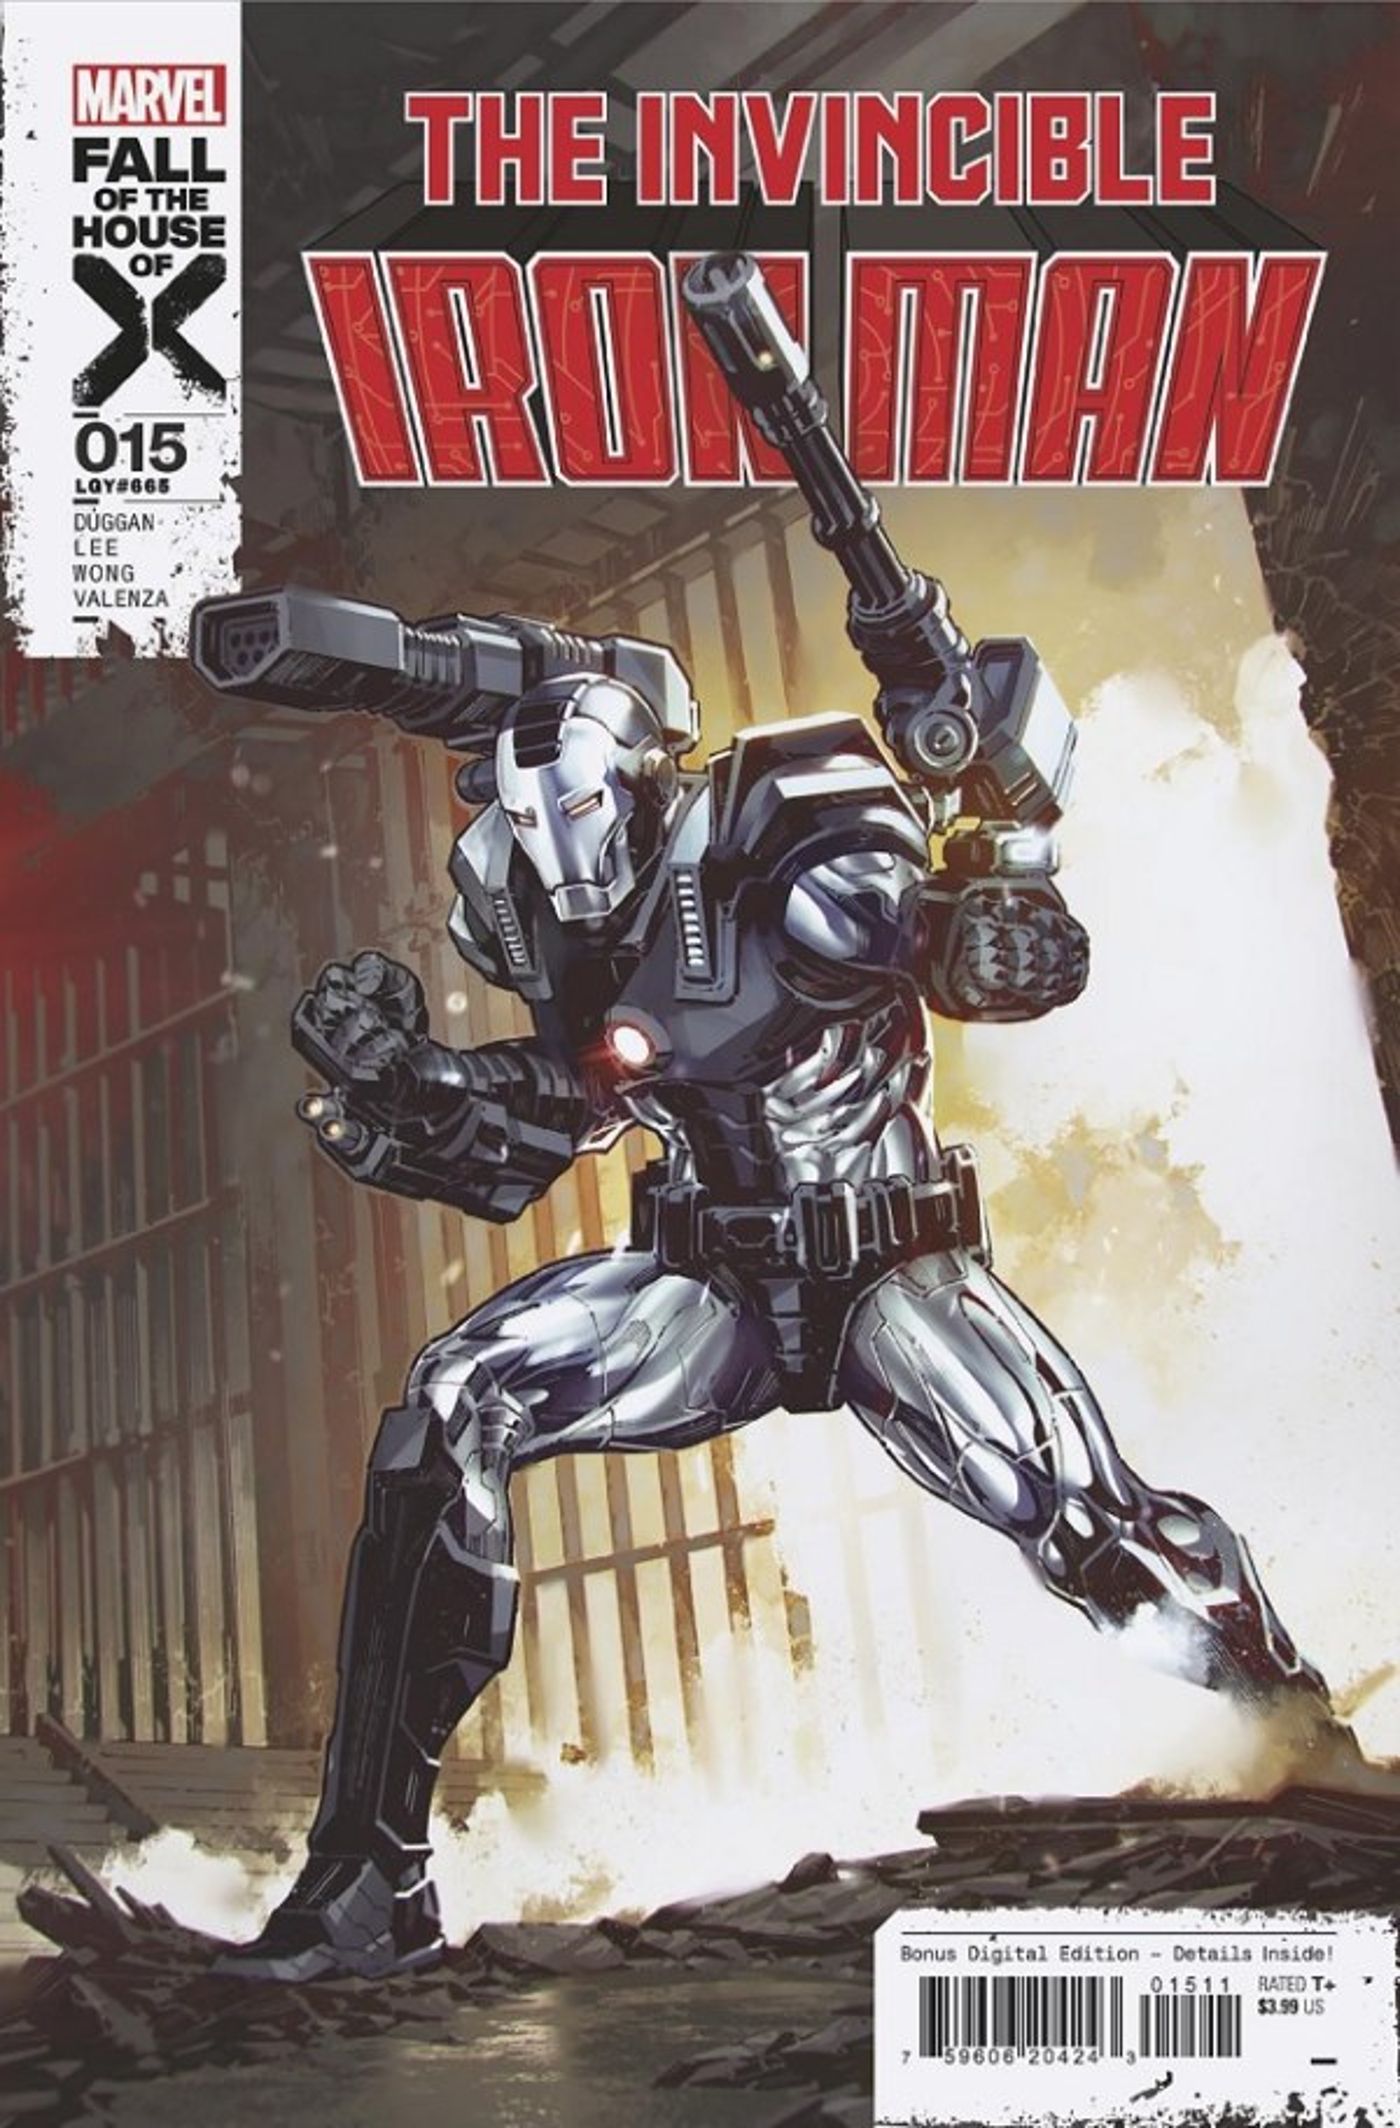 main cover for Invincible Iron Man #15 by artist Kael Ngu, Iron Man in battle stance